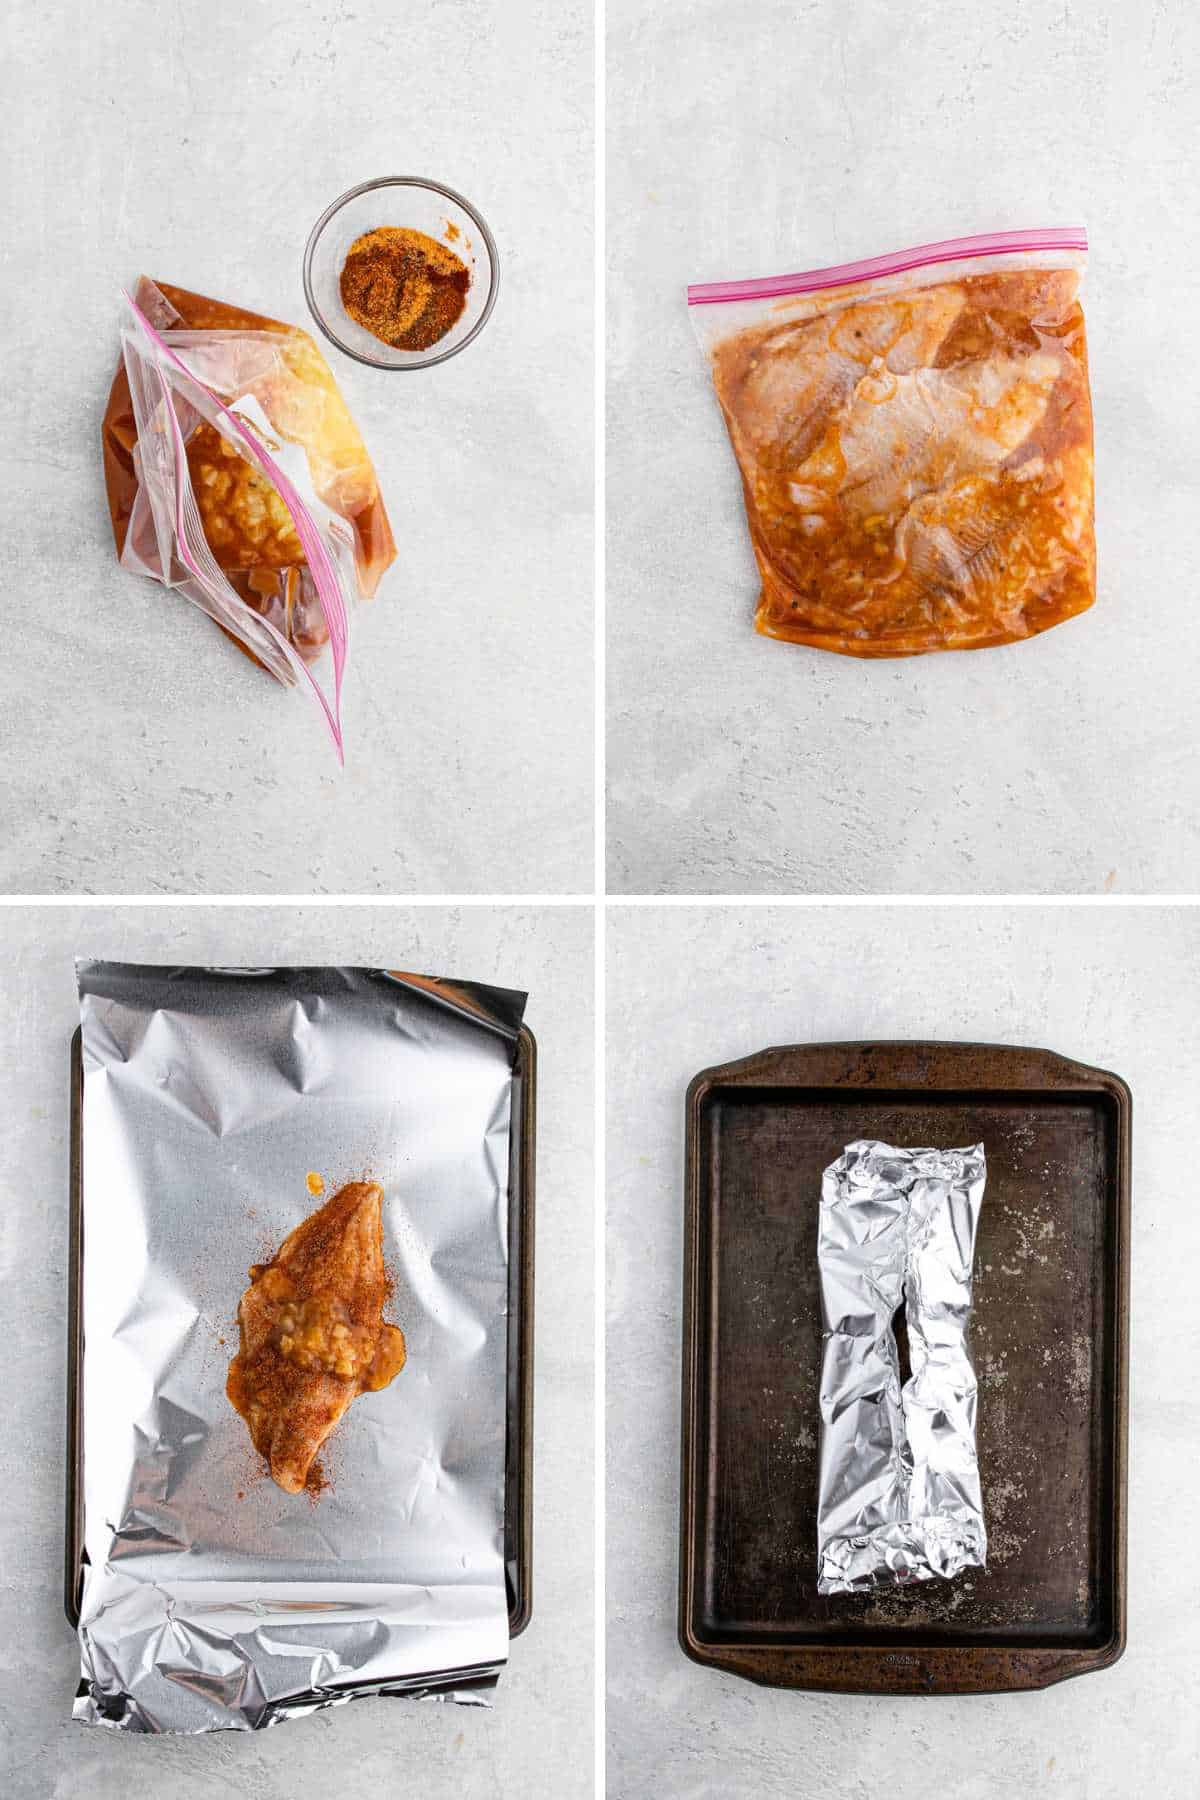 Steps to make grilled catfish from marinating the catfish to wrapping in foil.